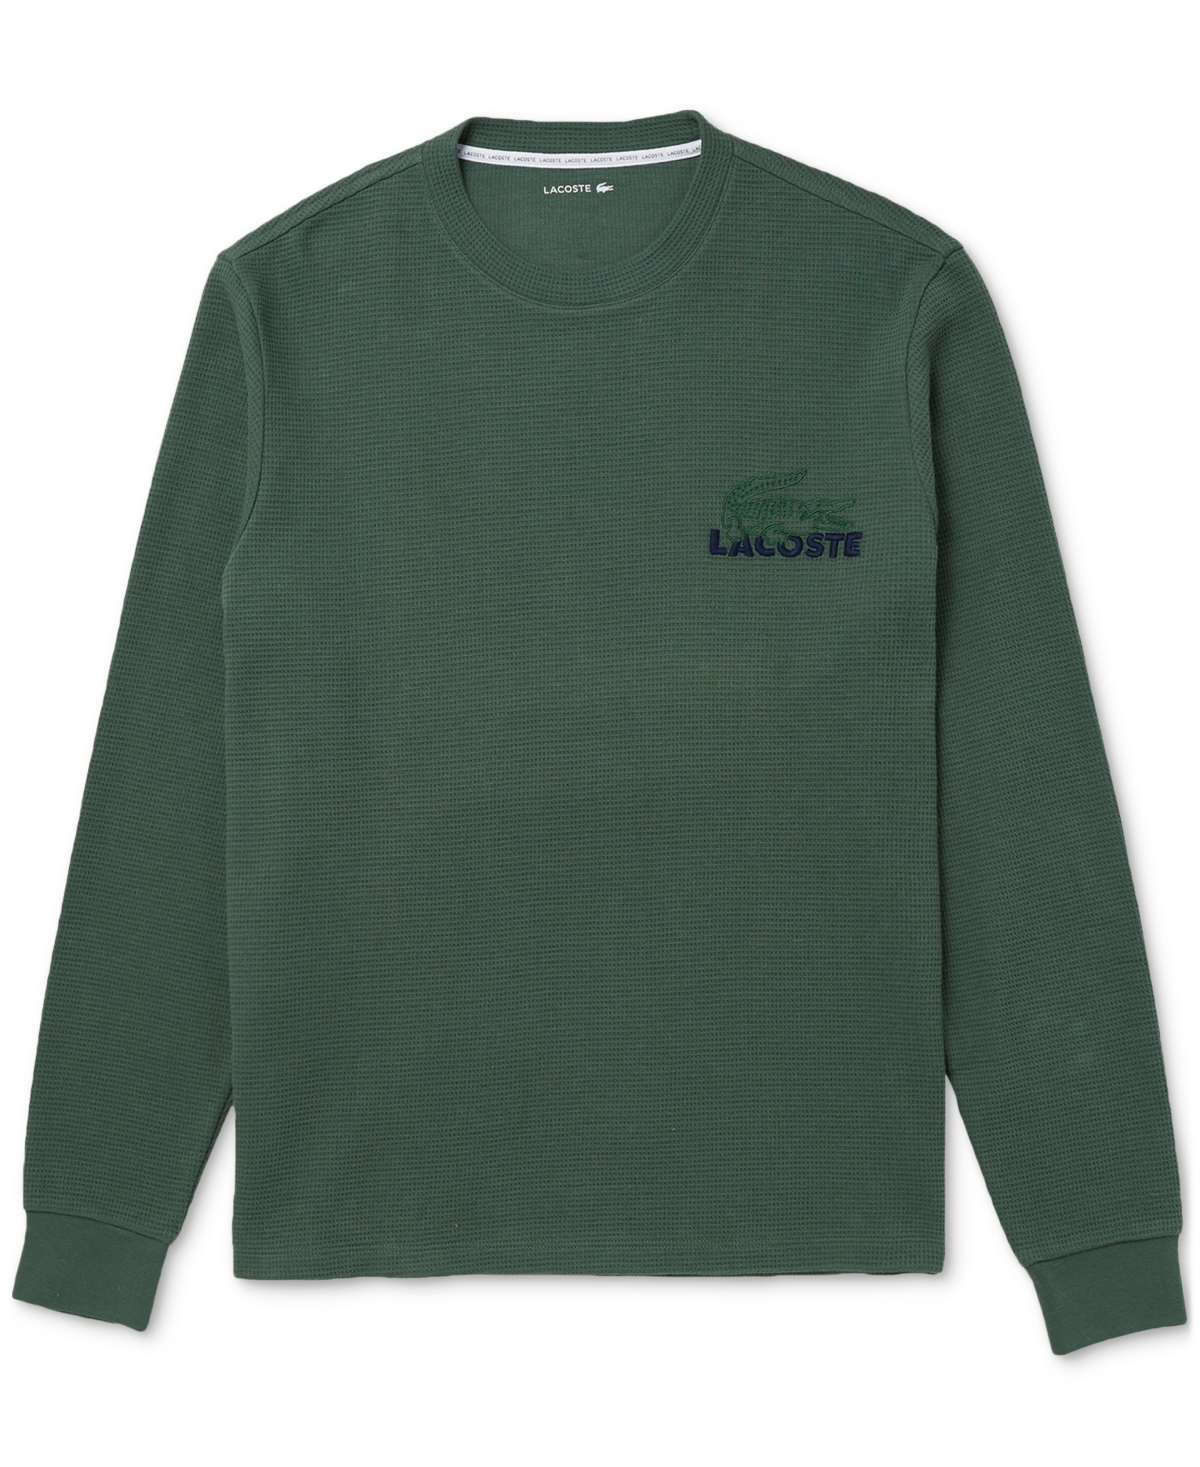 Lacoste Large Men's Relaxed Fit Large Croc Thermal Sleep Shirt